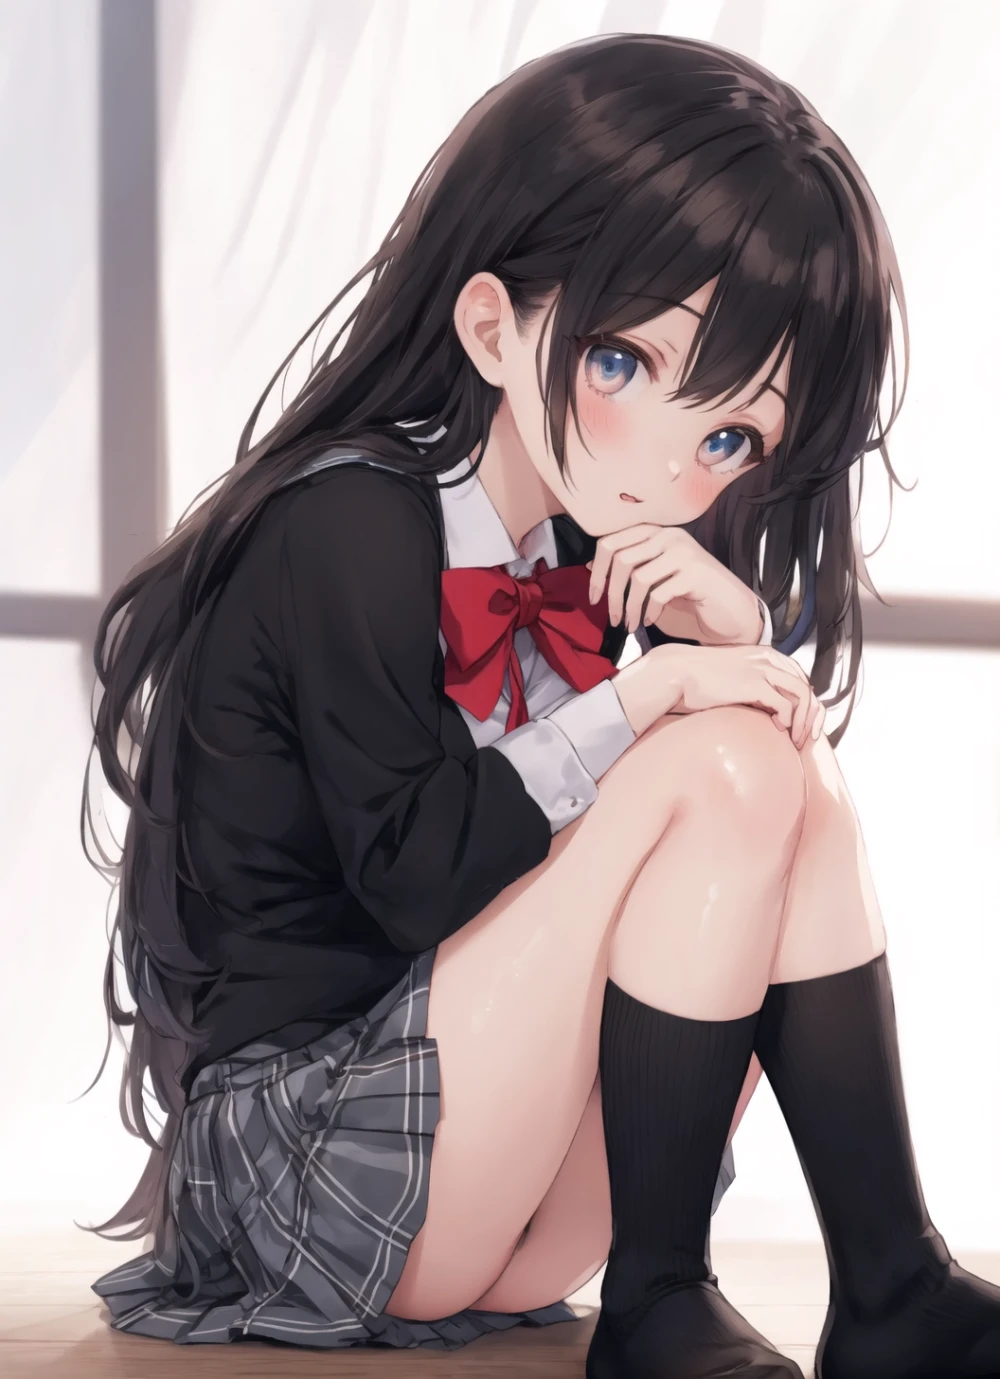 high-school-girl-anime-style-all-ages-22